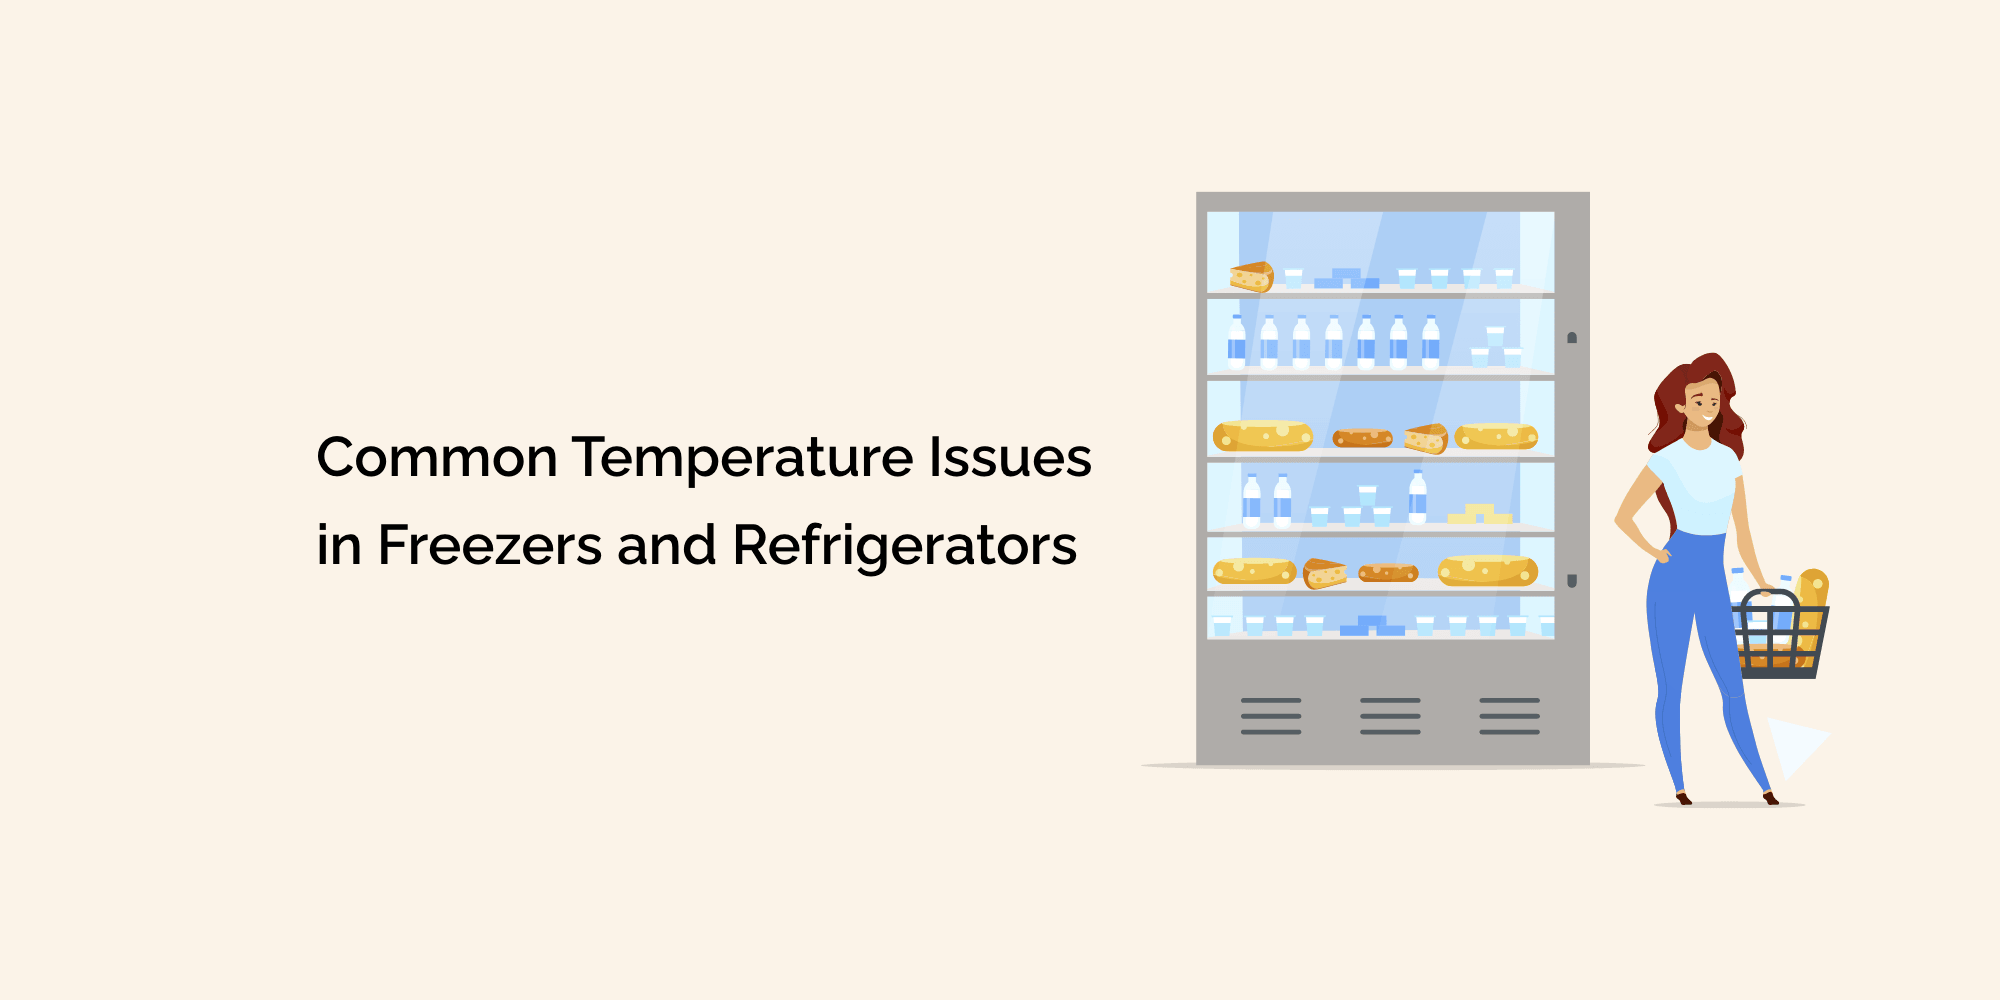 Common Temperature Issues in Freezers and Refrigerators